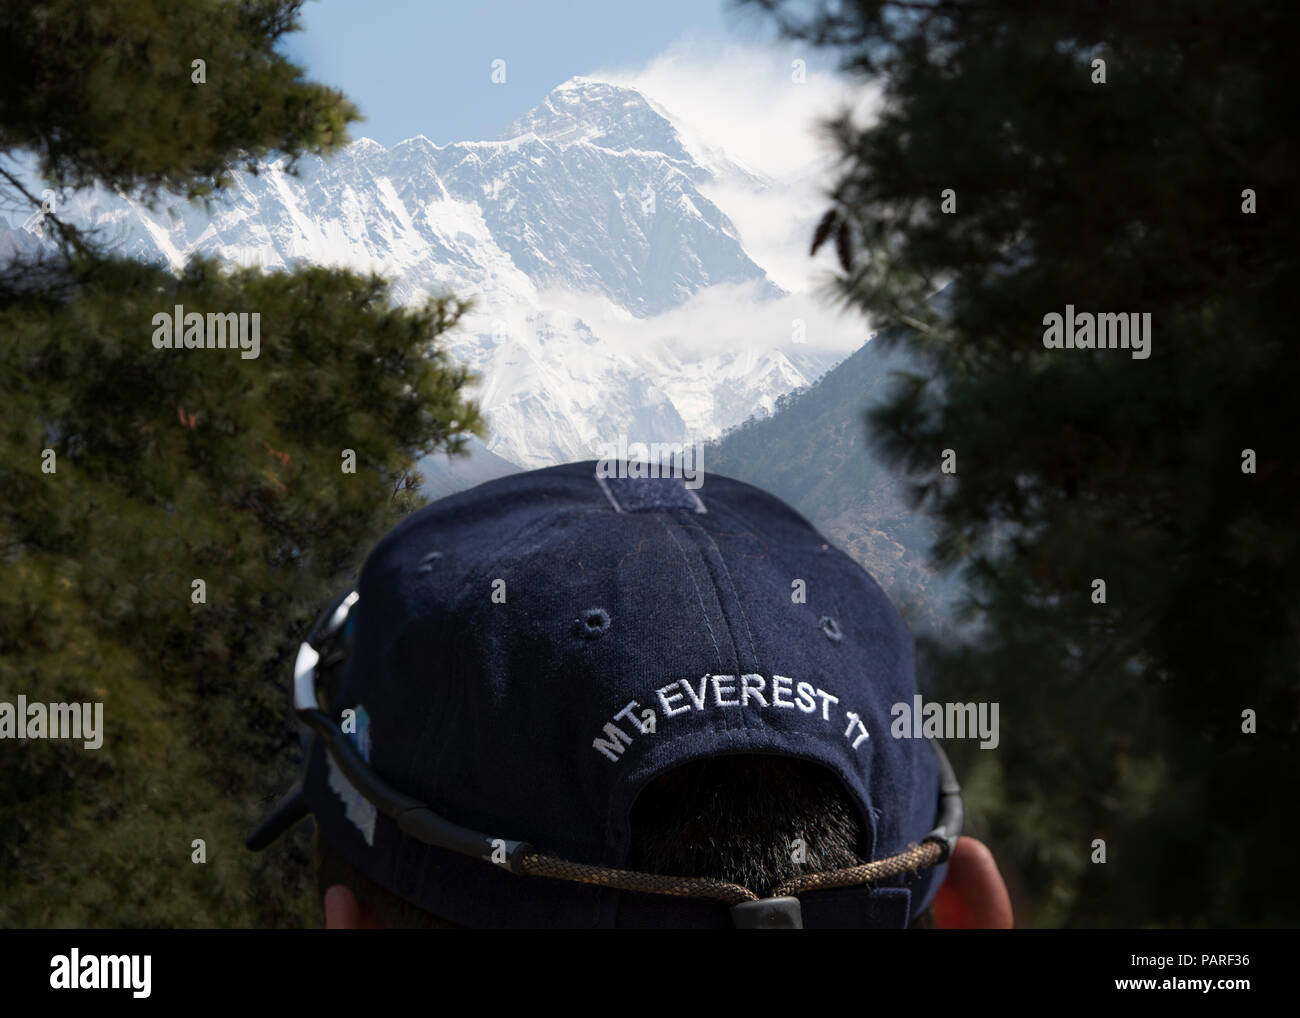 Nepal, Solo Khumbu, Everest, Sagamartha National Park, Man looking at view, wearing cap with Mt. Everest writing Stock Photo